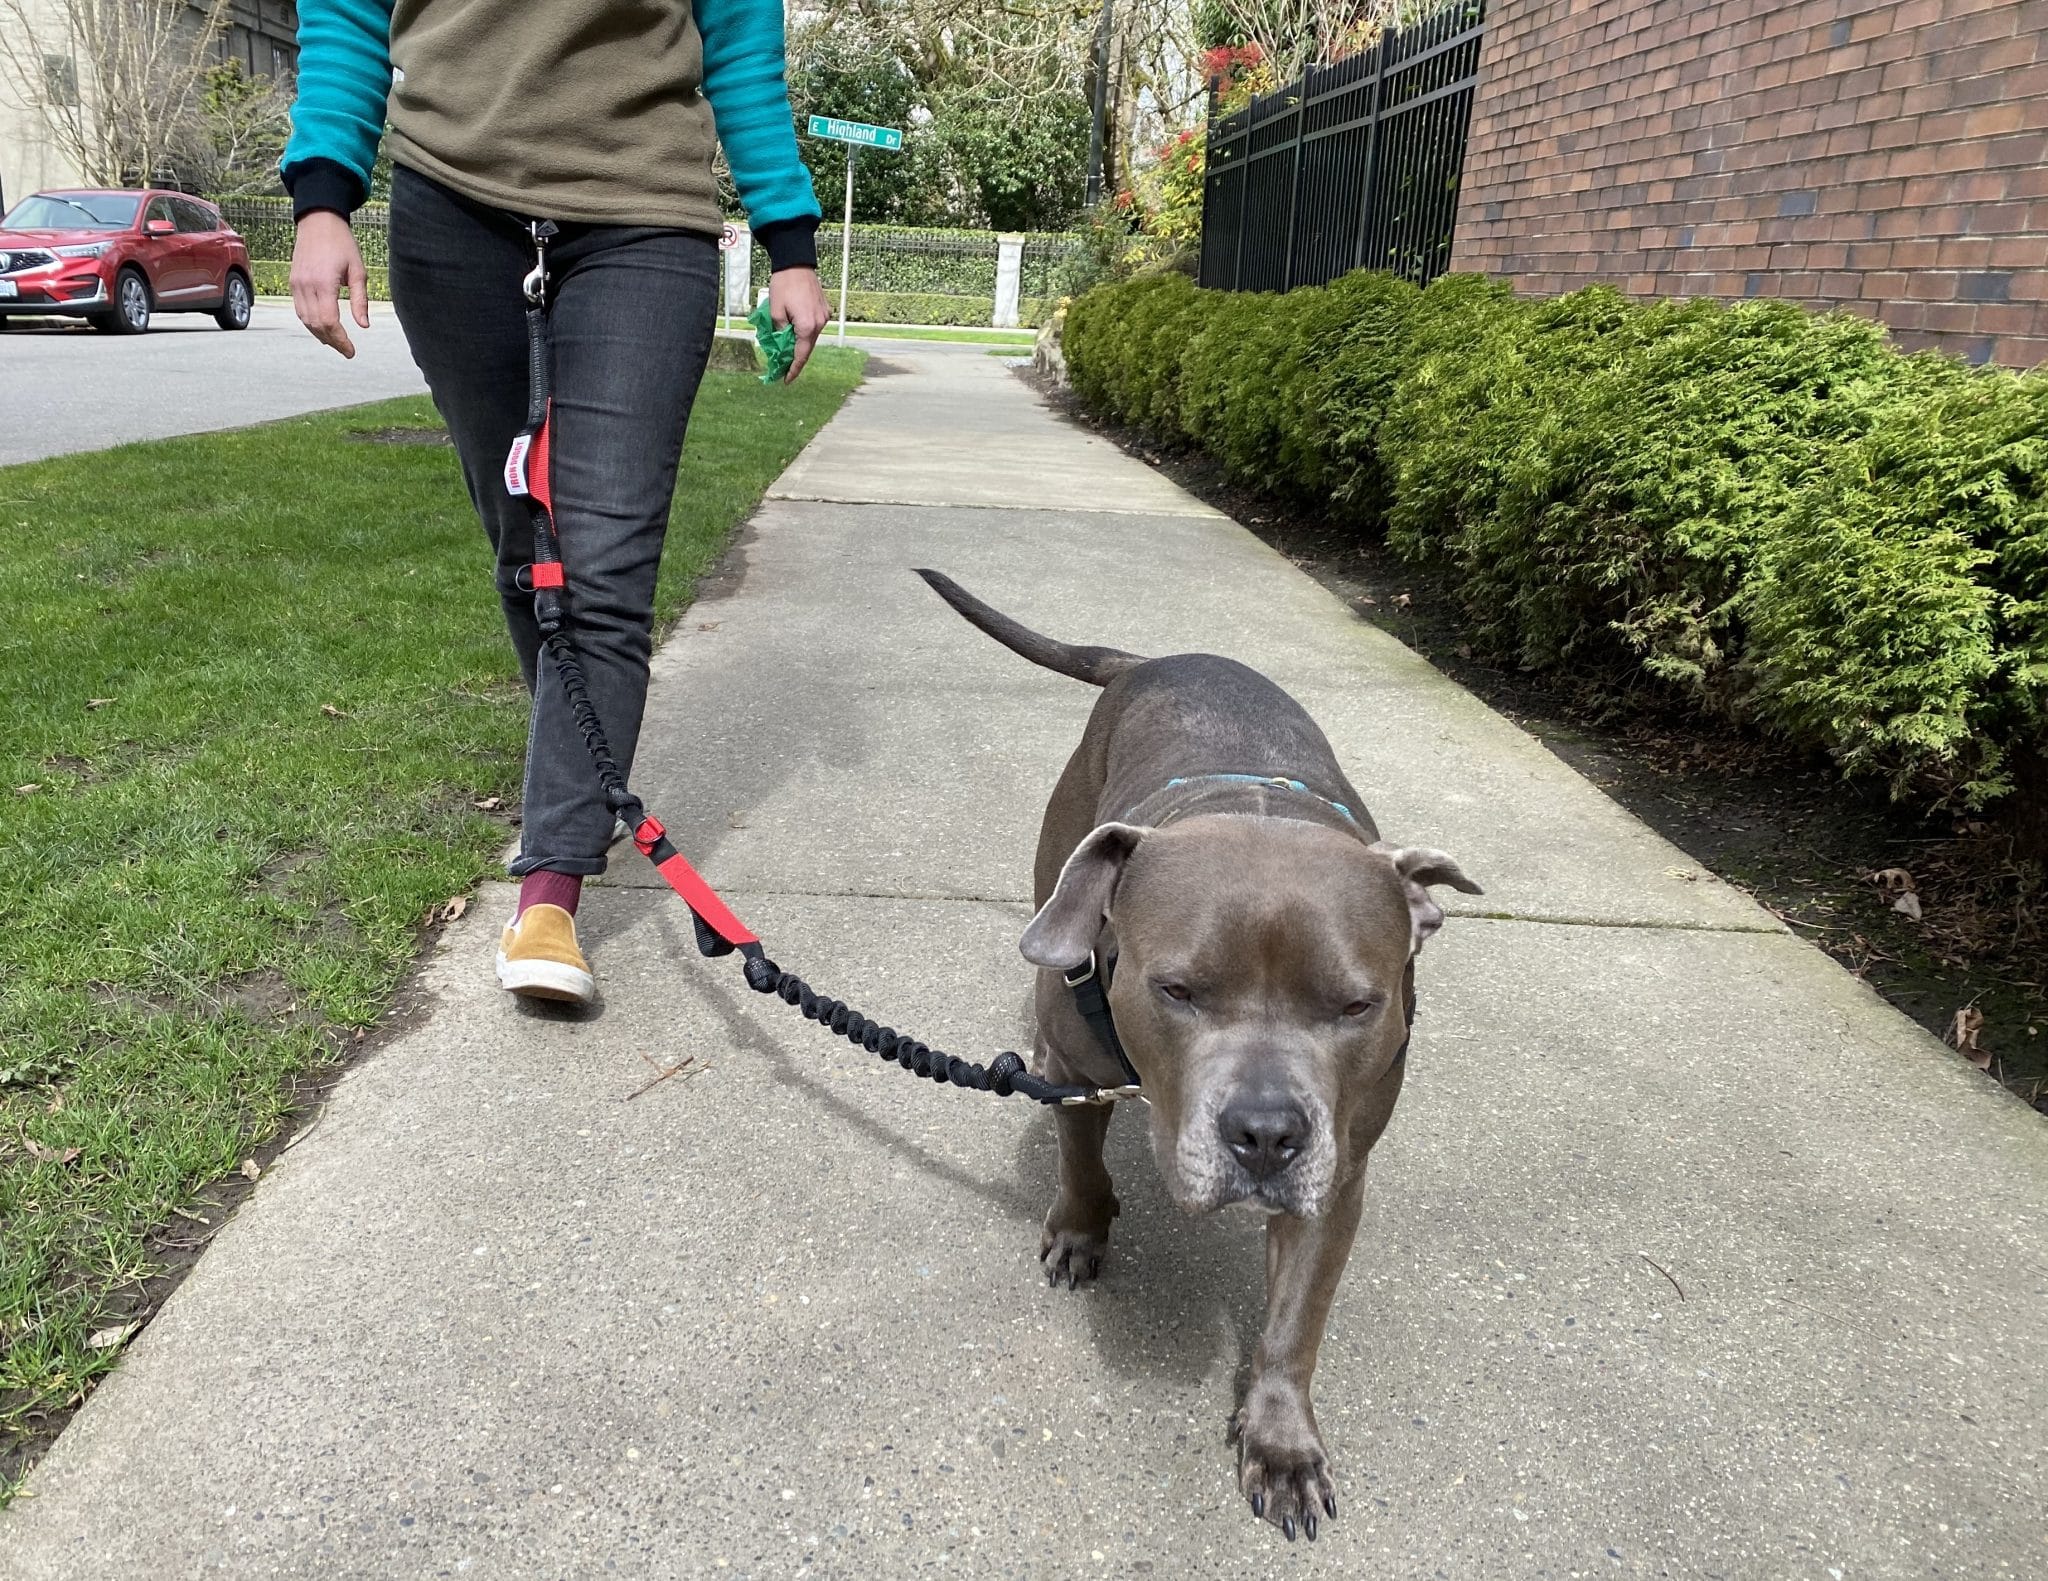 A dog walking on a hands free leash